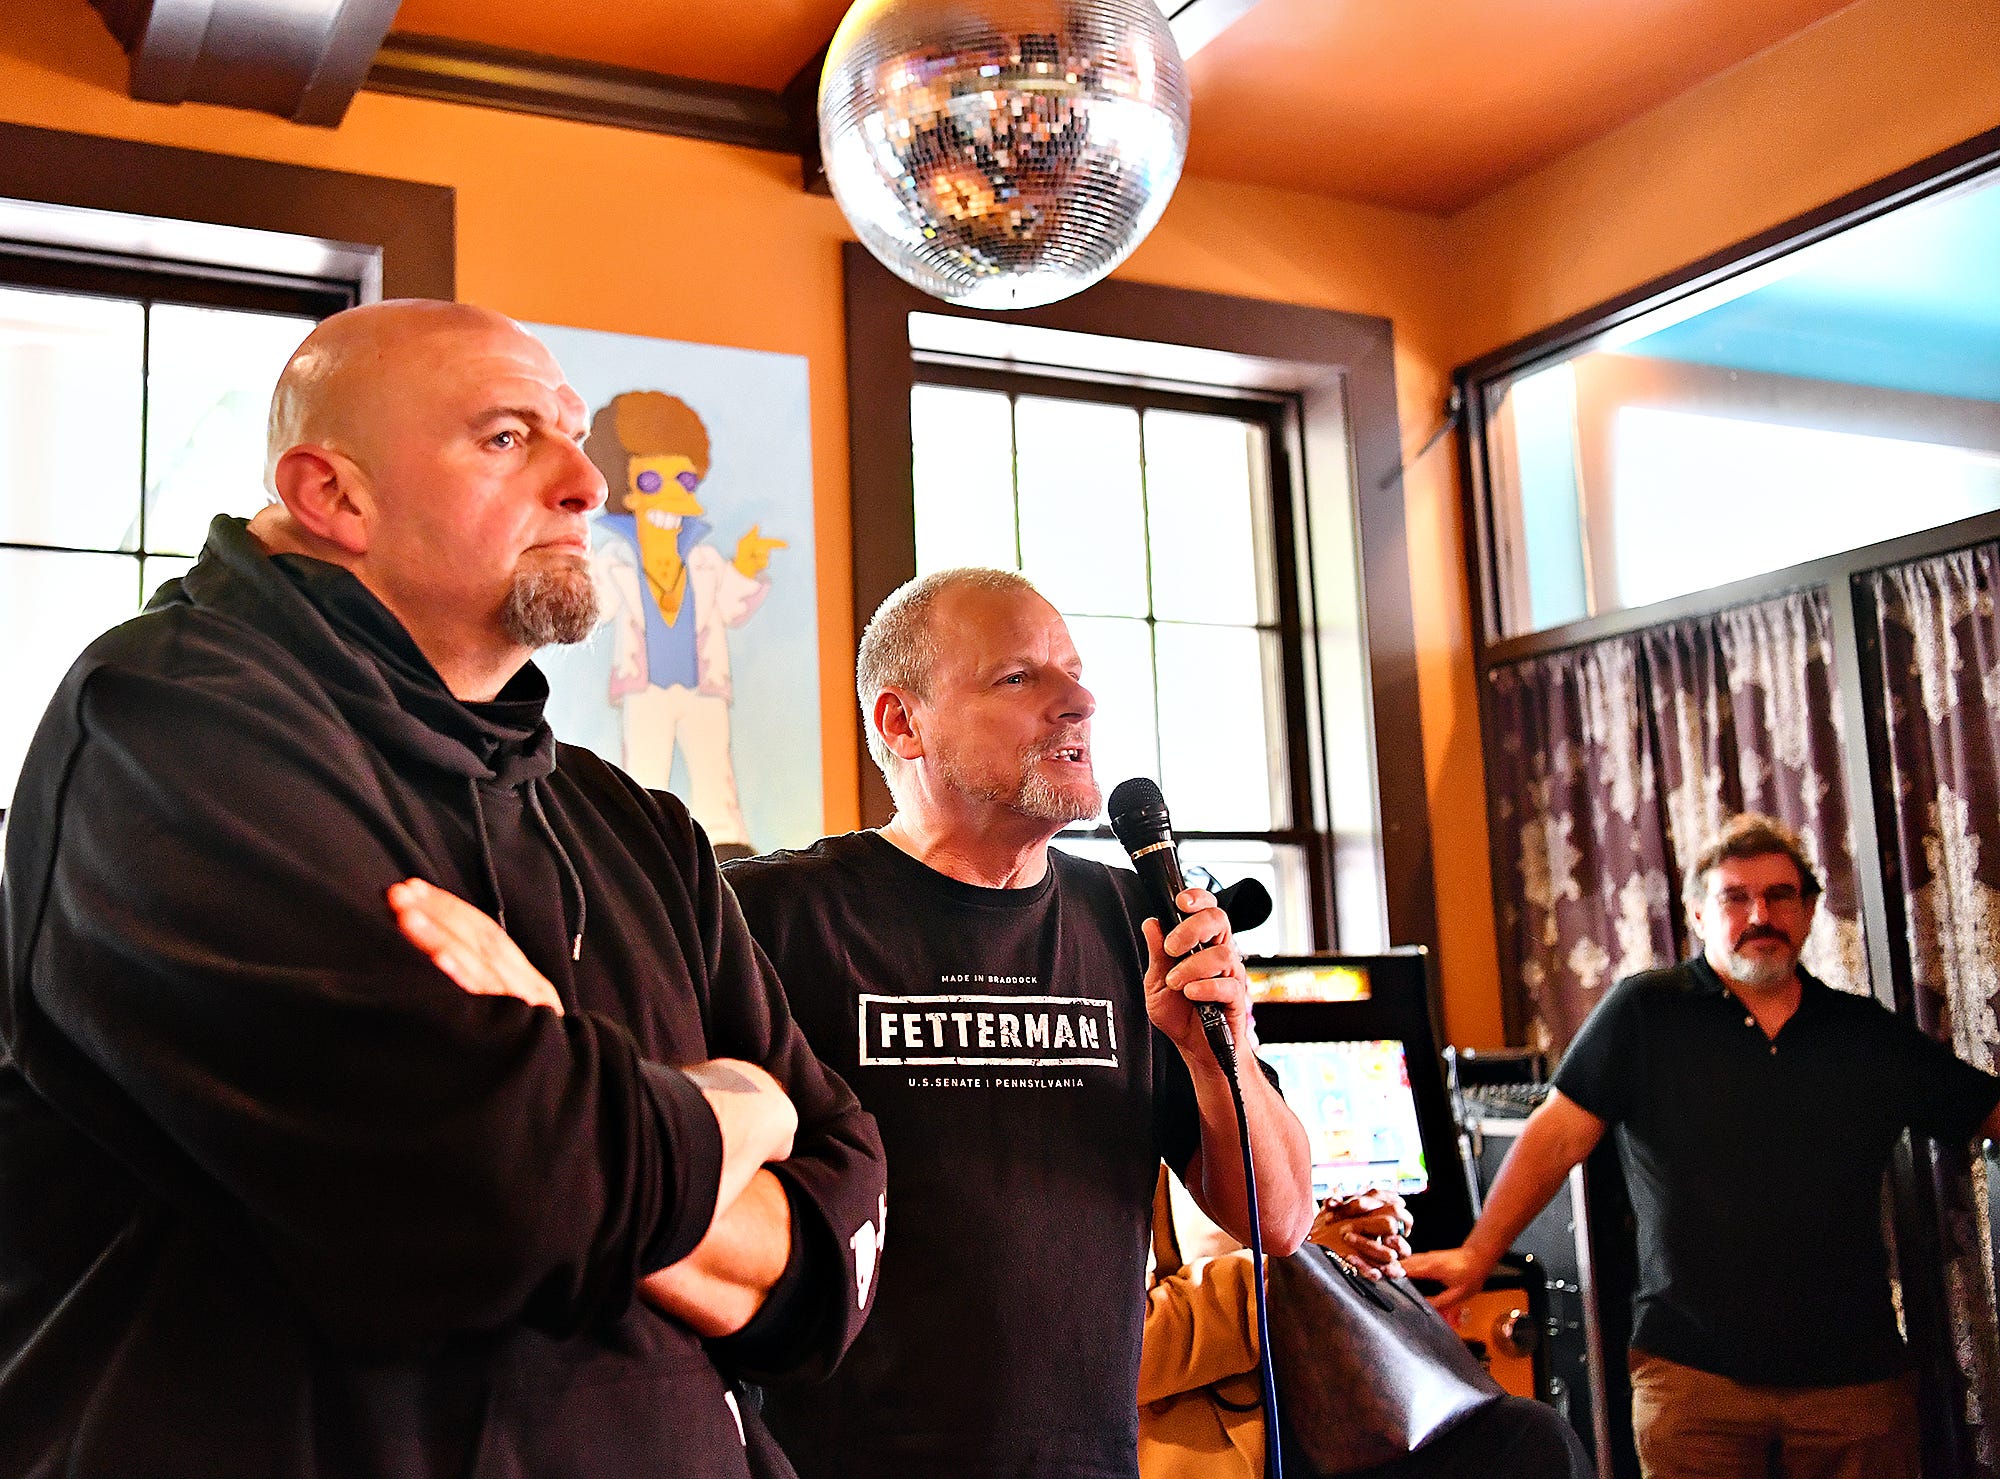 Owner Scott Eden, right, looks on as Mayor Michael Helfrich speaks during a campaign stop for U.S. Senate candidate Lt. Gov. John Fetterman at Holy Hound Taproom in York City, Thursday, May 12, 2022. Dawn J. Sagert photo